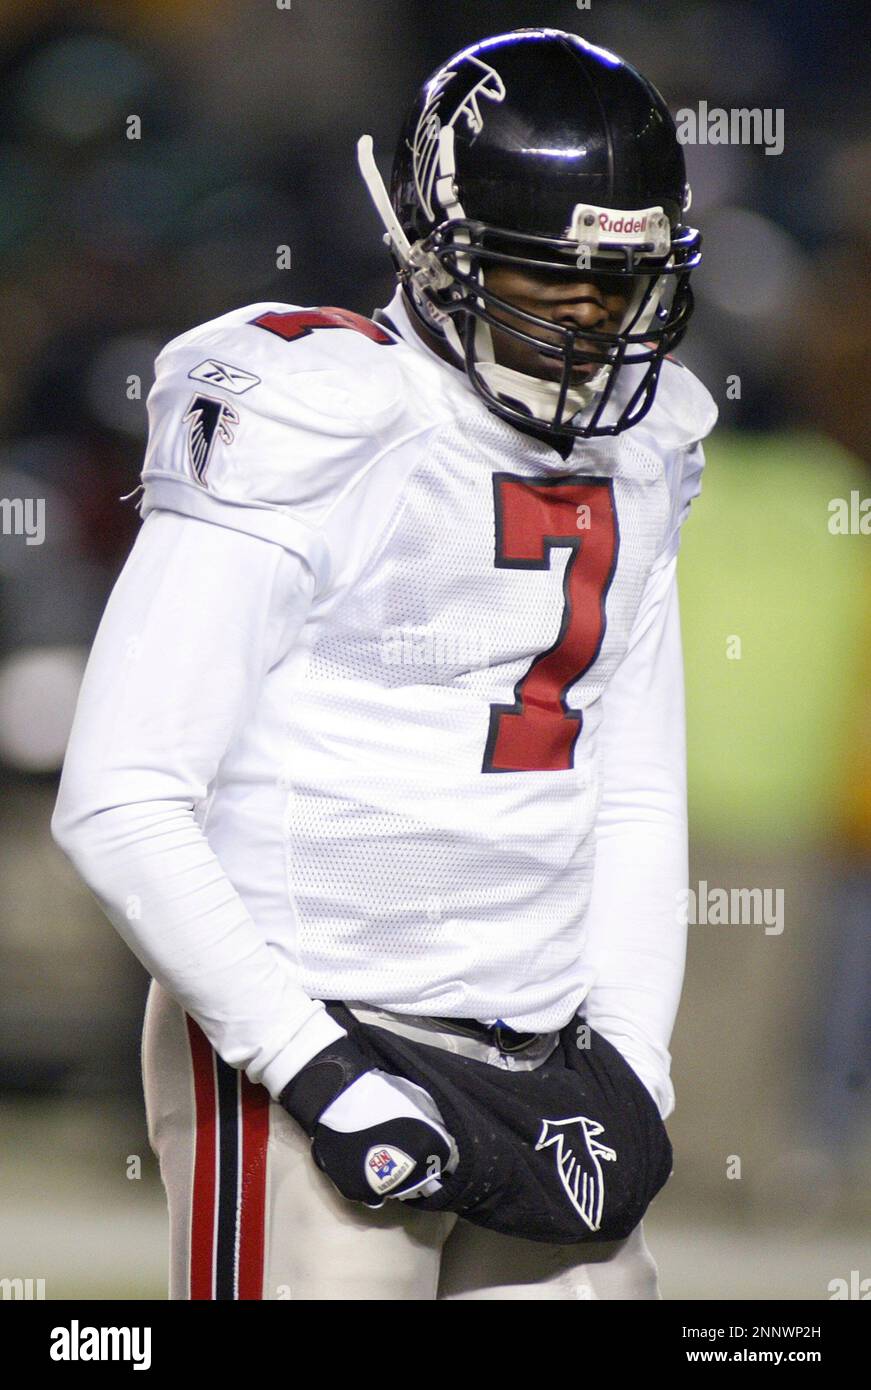 11 Jan 2003: A dejected Michael Vick of the Atlanta Falcons during the  Falcons 20-6 loss to the Philadelphia Eagles in the NFC Divisional playoff  game at Veterans Stadium in Philadelphia, PA. (